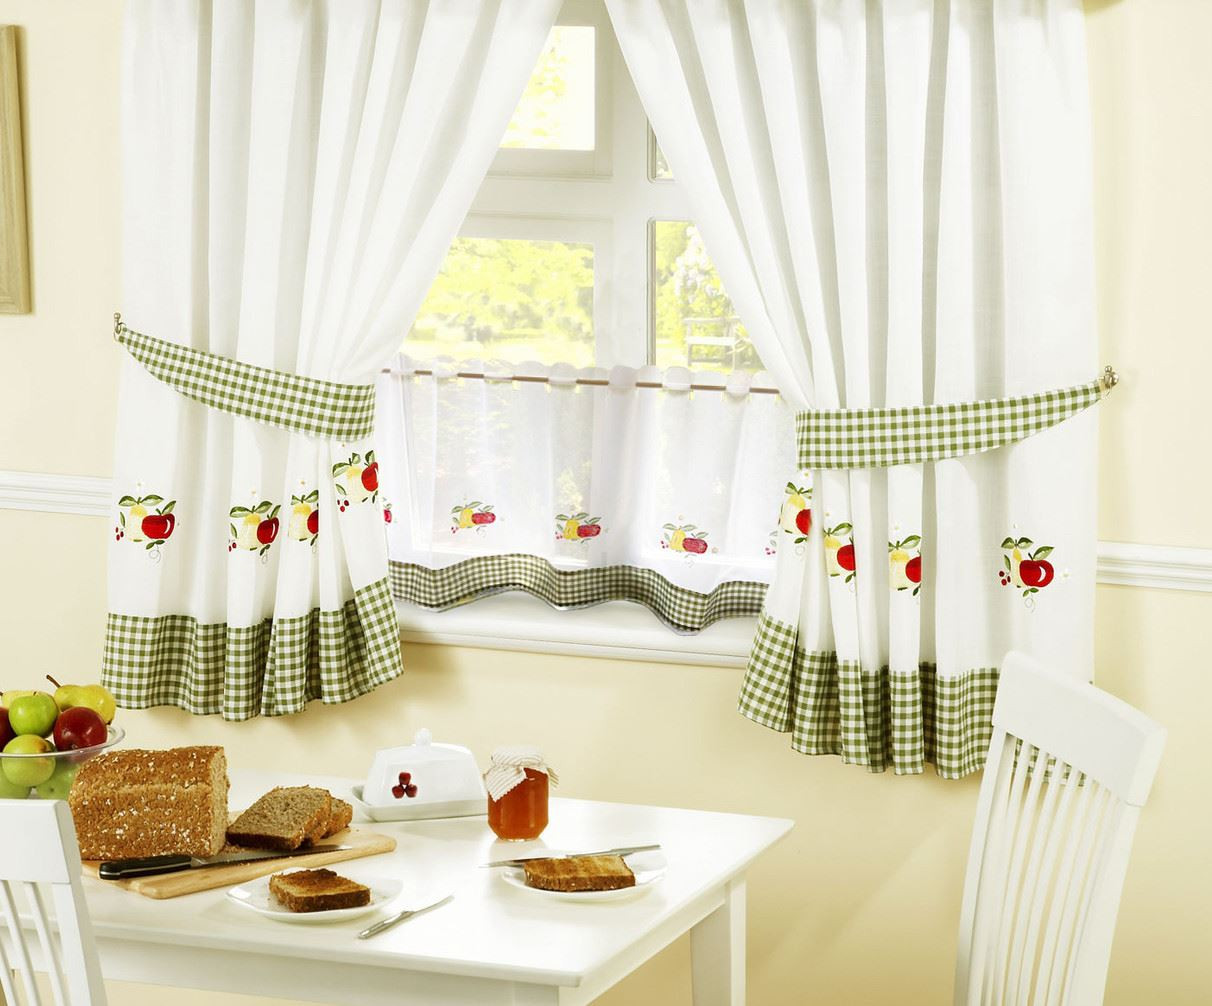 Apple Curtains For Kitchen
 APPLES & PEARS GINGHAM KITCHEN CURTAINS & 24” CAFE PANEL